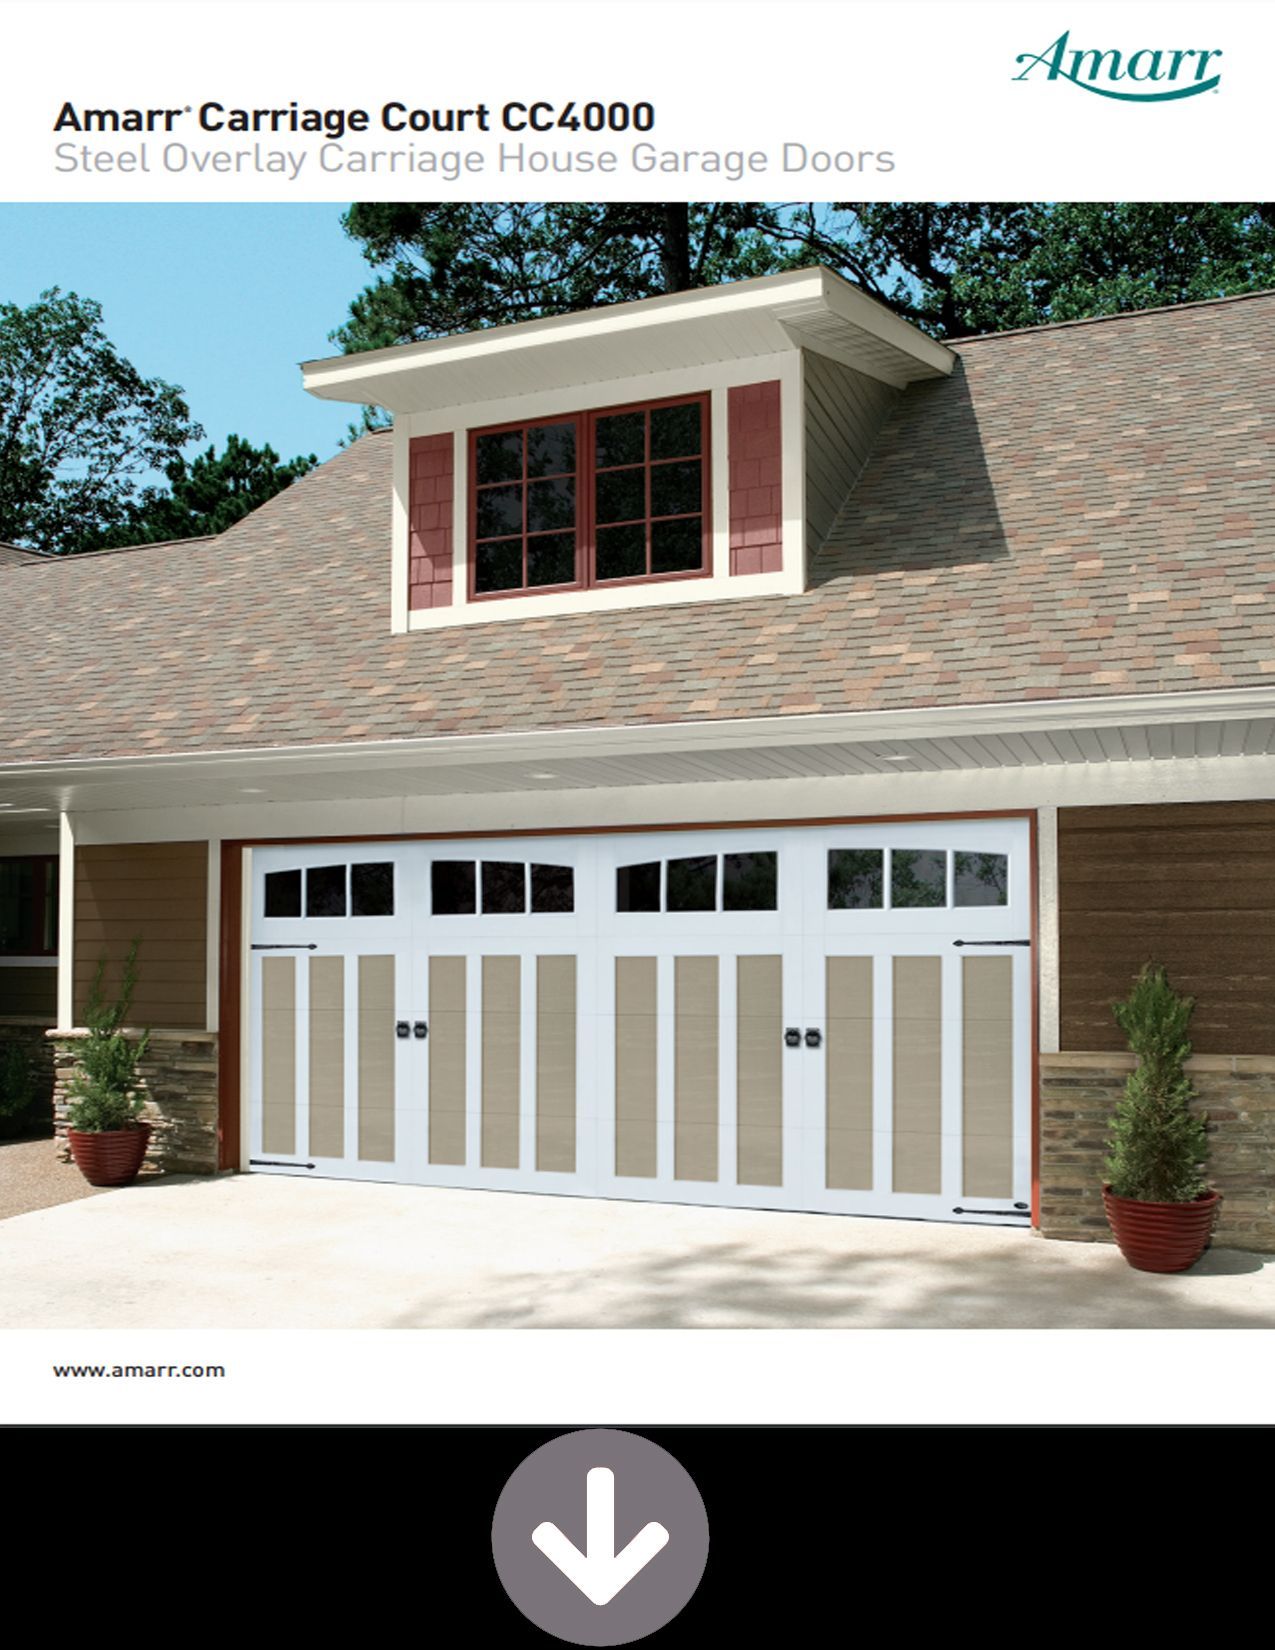 Amarr Carriage Court
Steel Overlay Carriage House Garage Doors